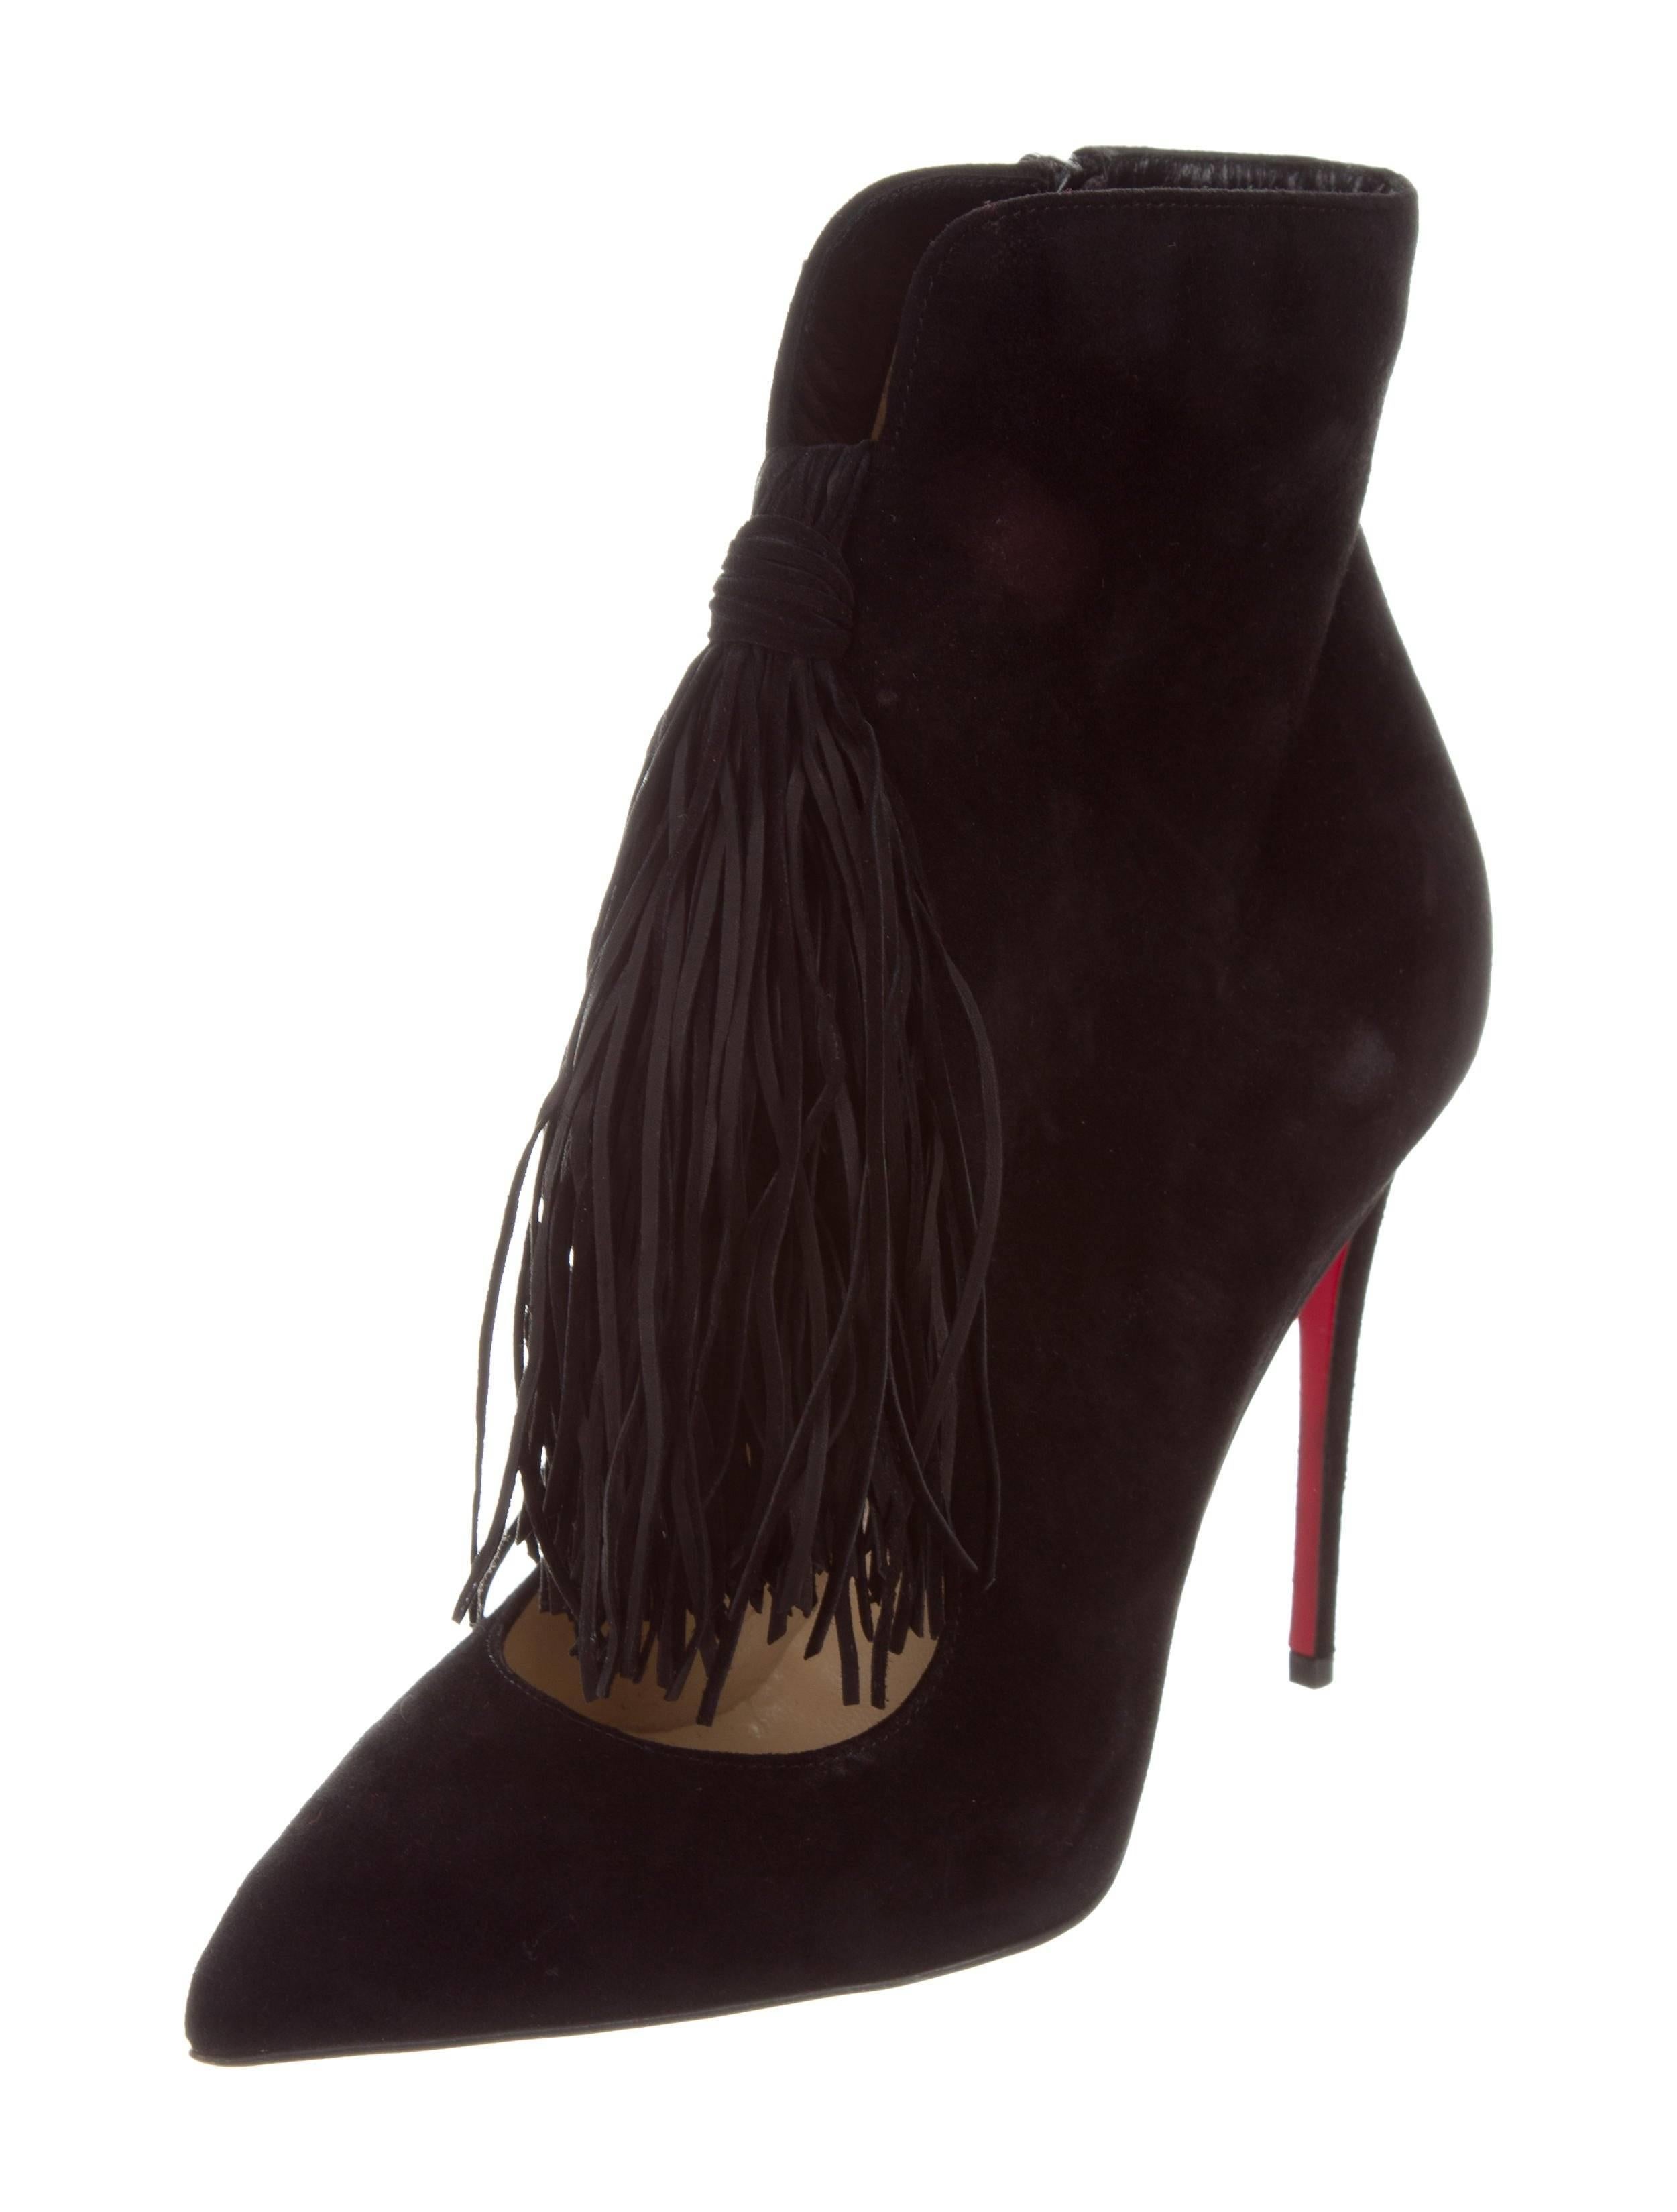 Christian Louboutin New Black Suede Fringe Evening Ankle Booties Boots in Box

Size IT 36
Suede
Zipper closure
Made in Italy
Heel height 4"
Includes original Christian Louboutin dust bag and box